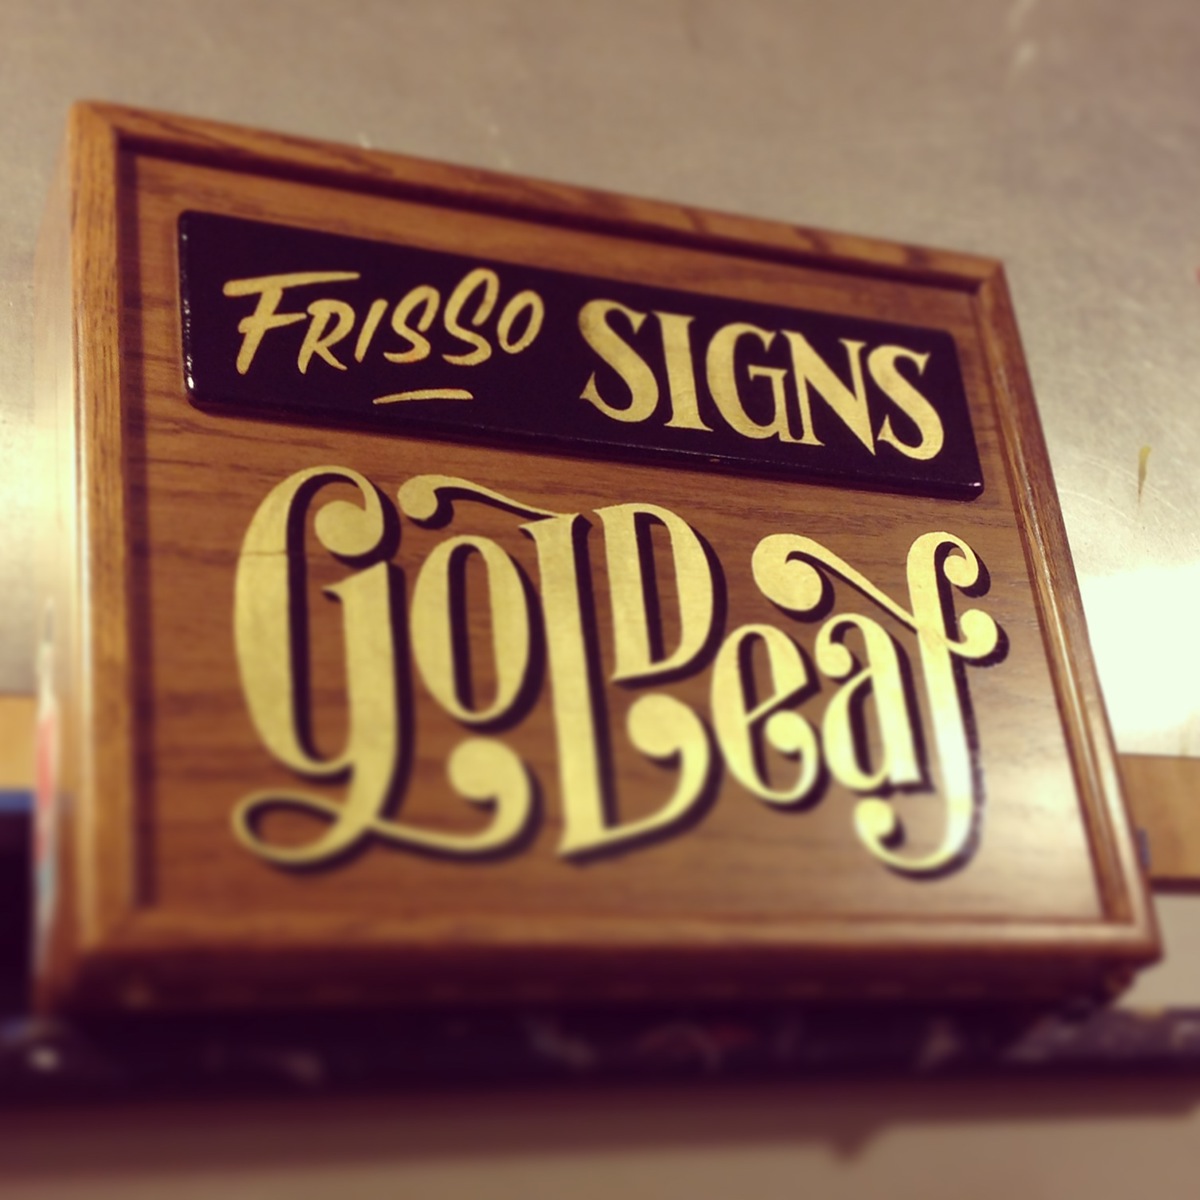 signpainting Handlettering Quotes Personal Work friss carl fredrik angell